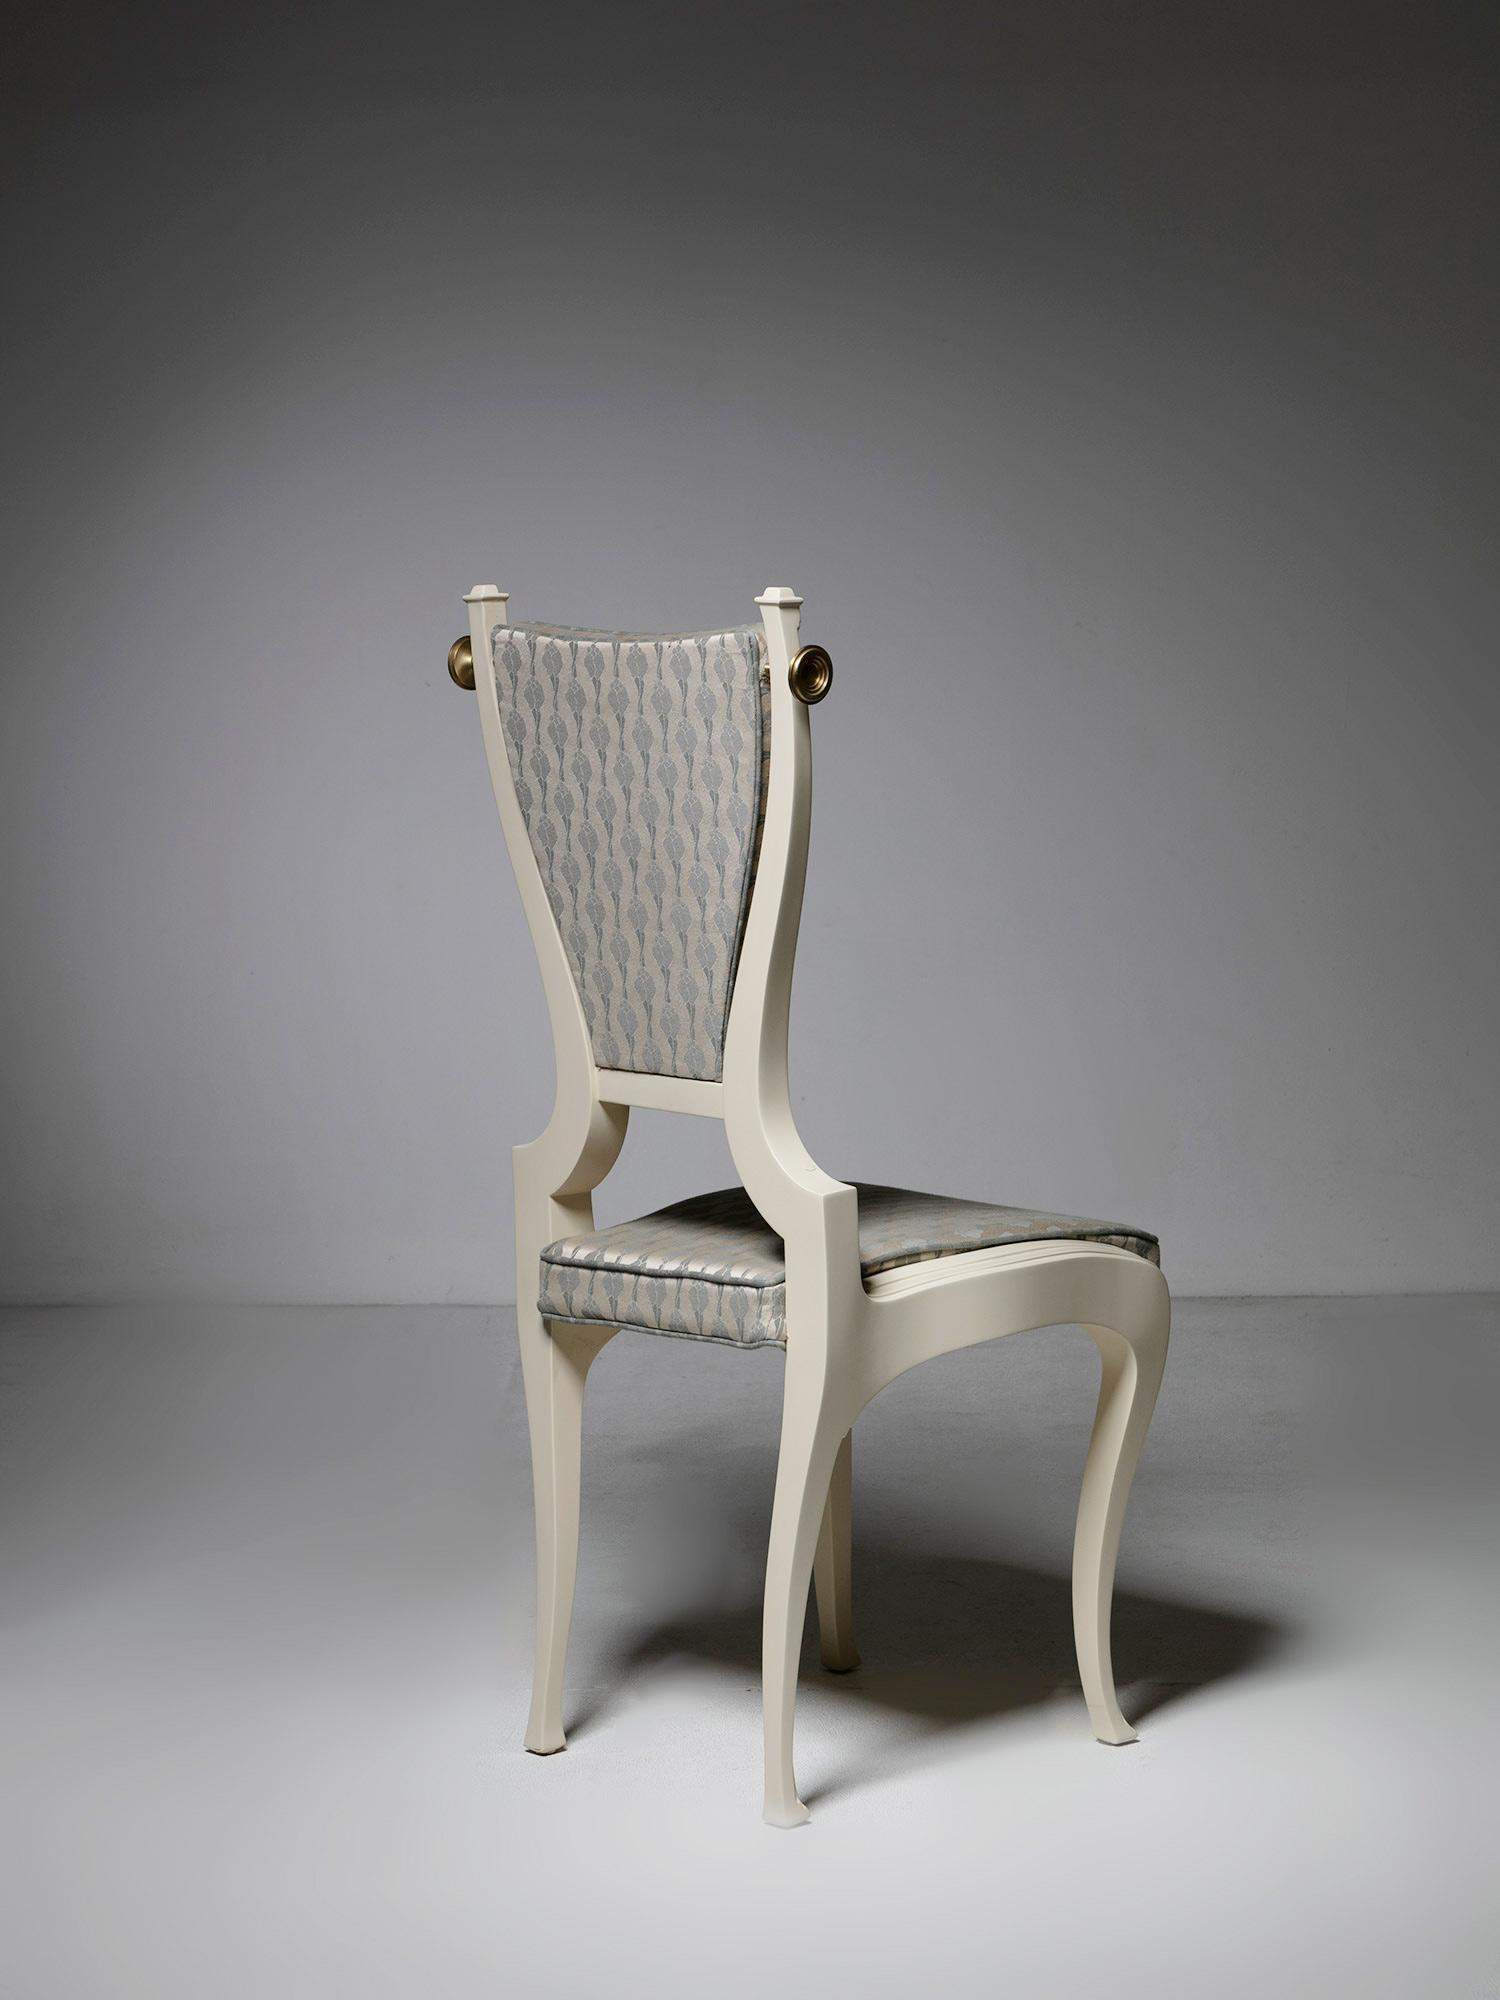 Late 20th Century Rare Sculptural Chair by Paolo Portoghesi for B&B Italia, Italy, 1990